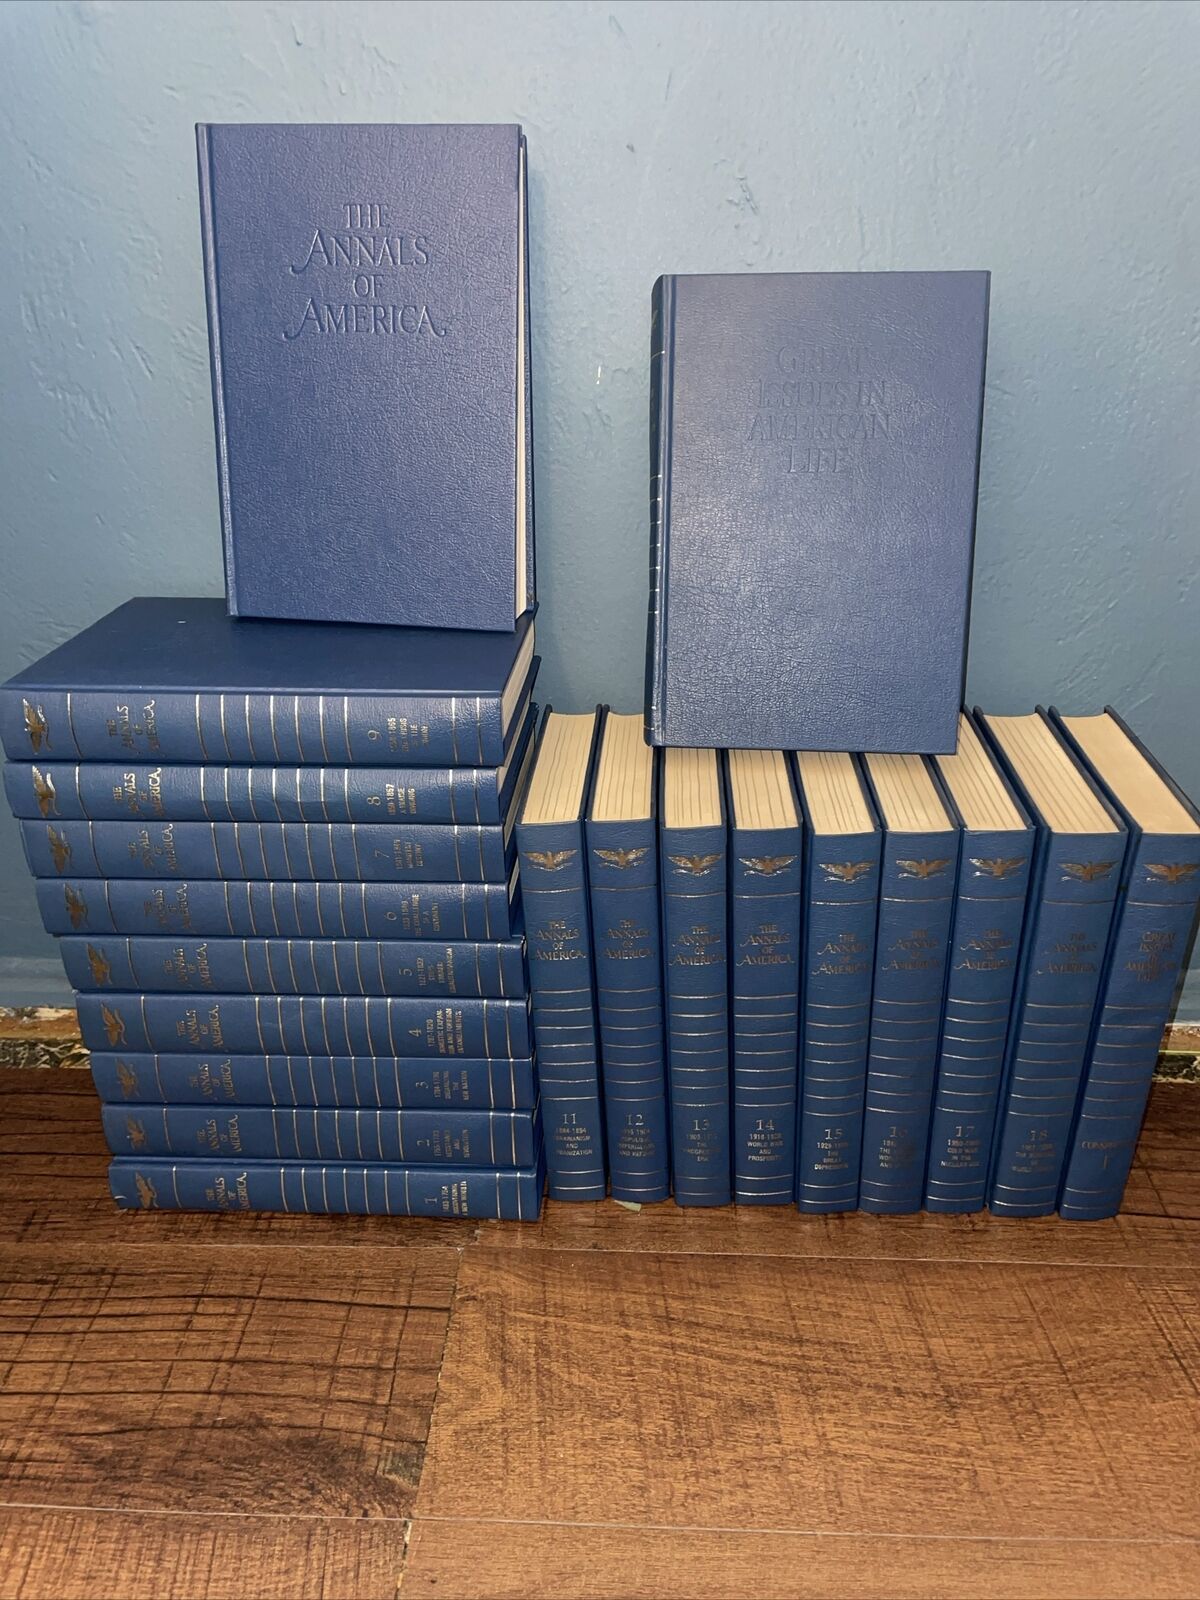 The Annals Of America 1968 20 Volume Set (1493-1968) by Encyclopedia Britannica